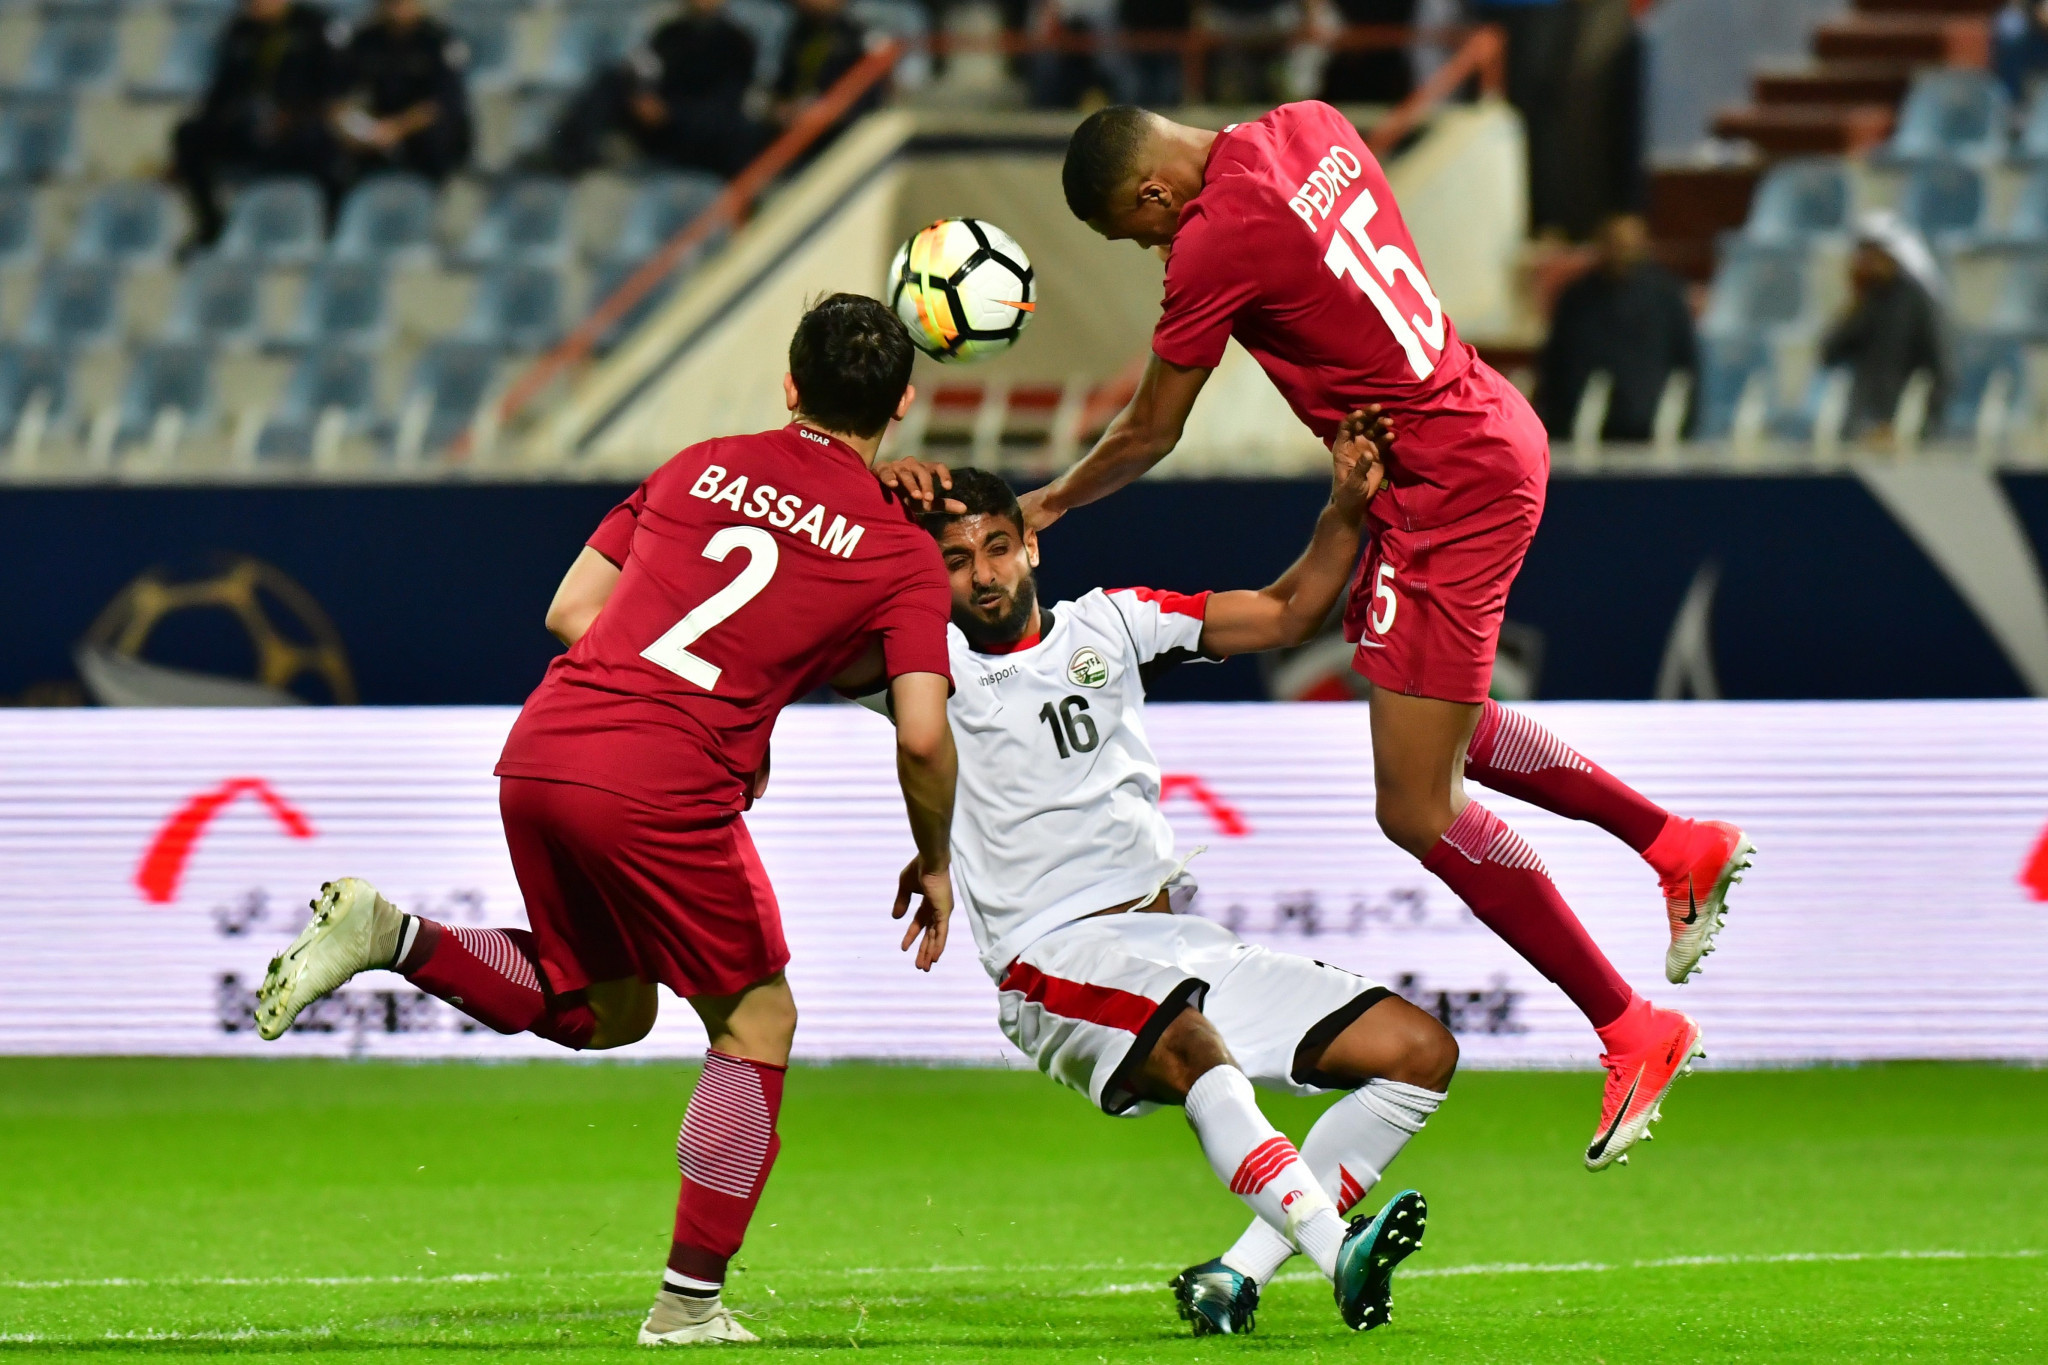 Qatar were in dominant form and scored three goals in the opening 18 minutes ©Getty Images